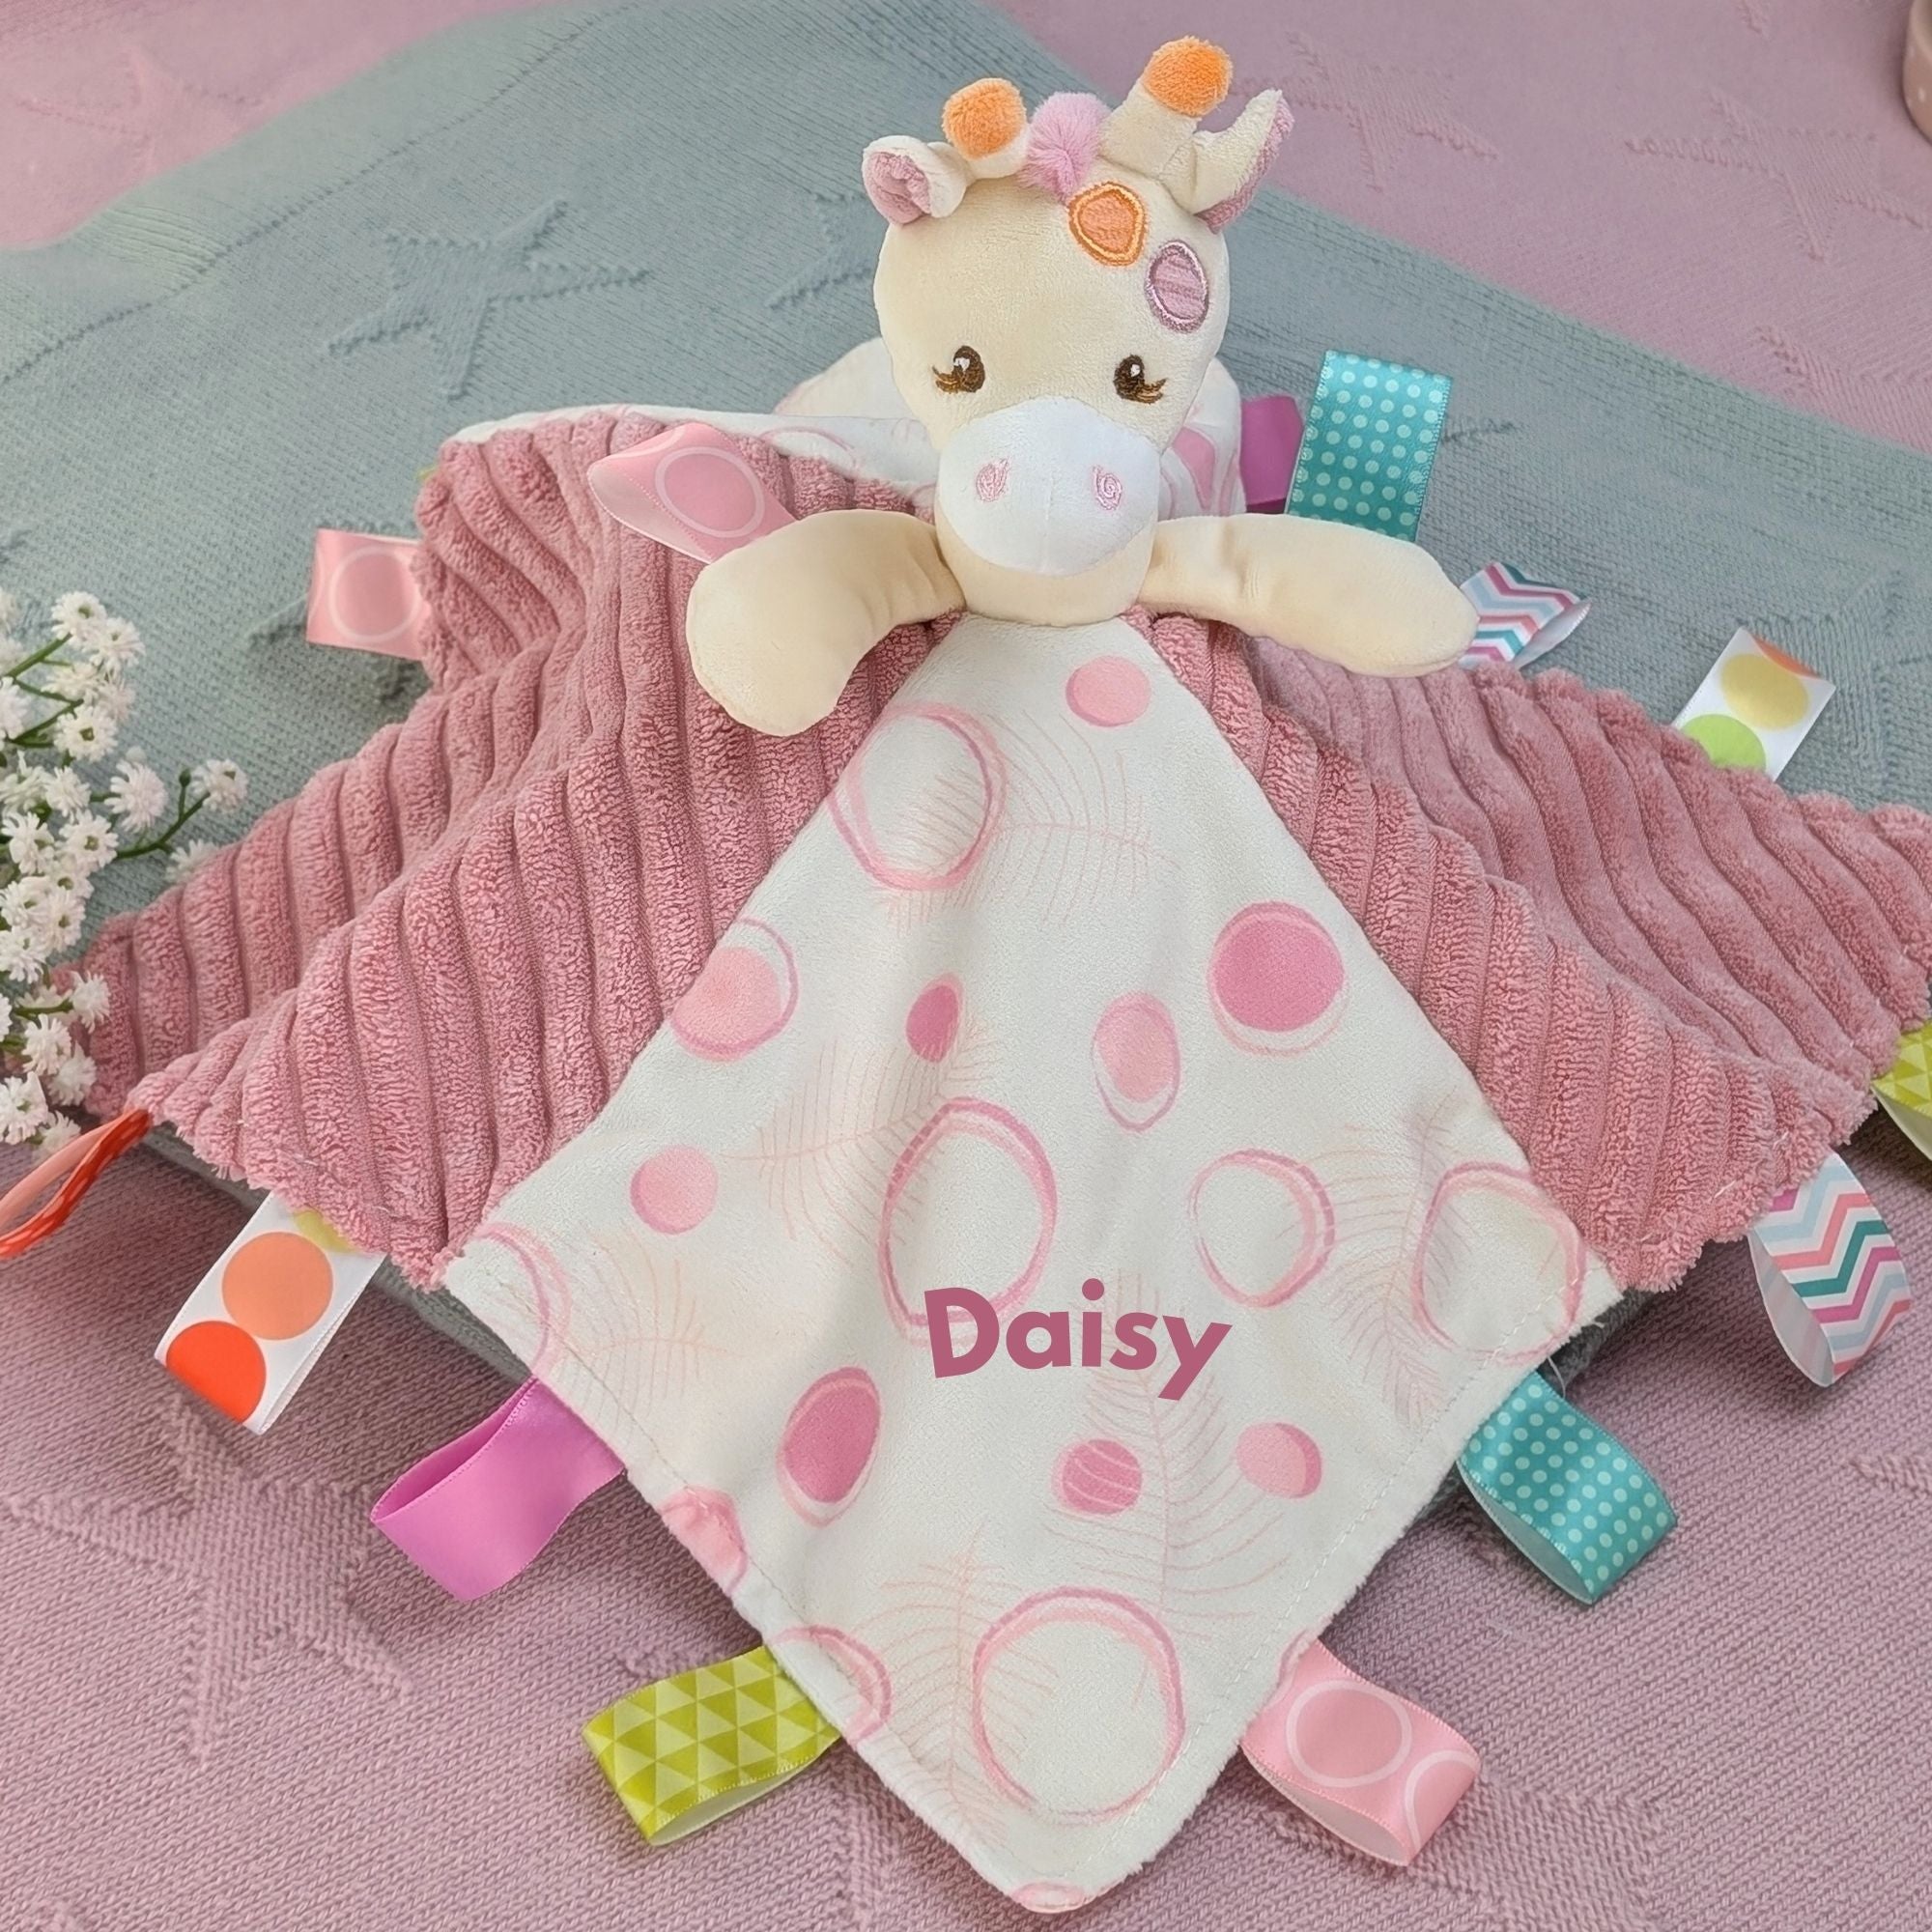 personalised tilly giraffe comforter with tags for sensory play. pink giraffe.